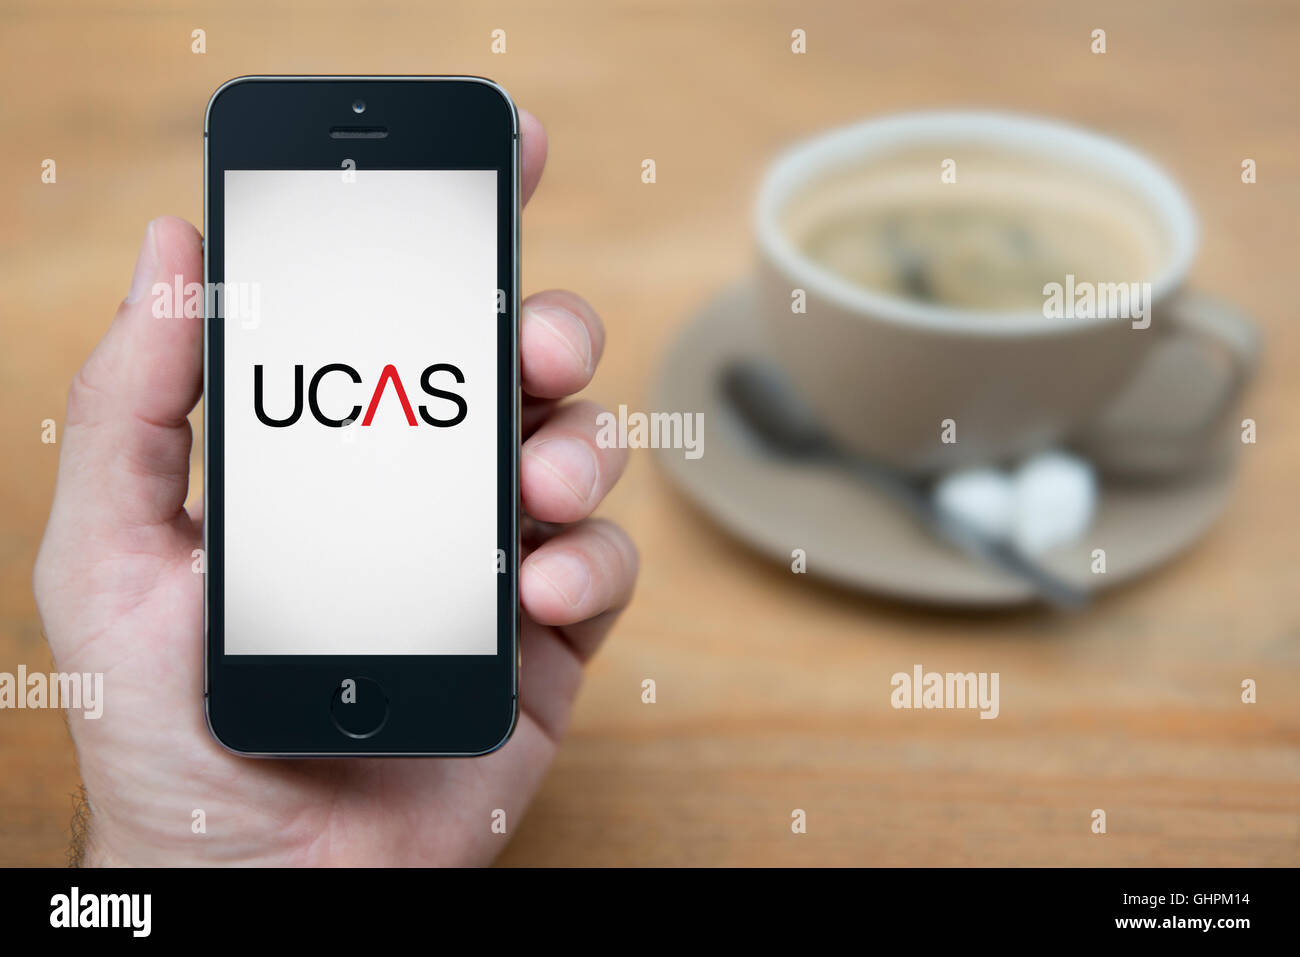 A man looks at his iPhone which displays the UCAS logo, while sat with a cup of coffee (Editorial use only). Stock Photo